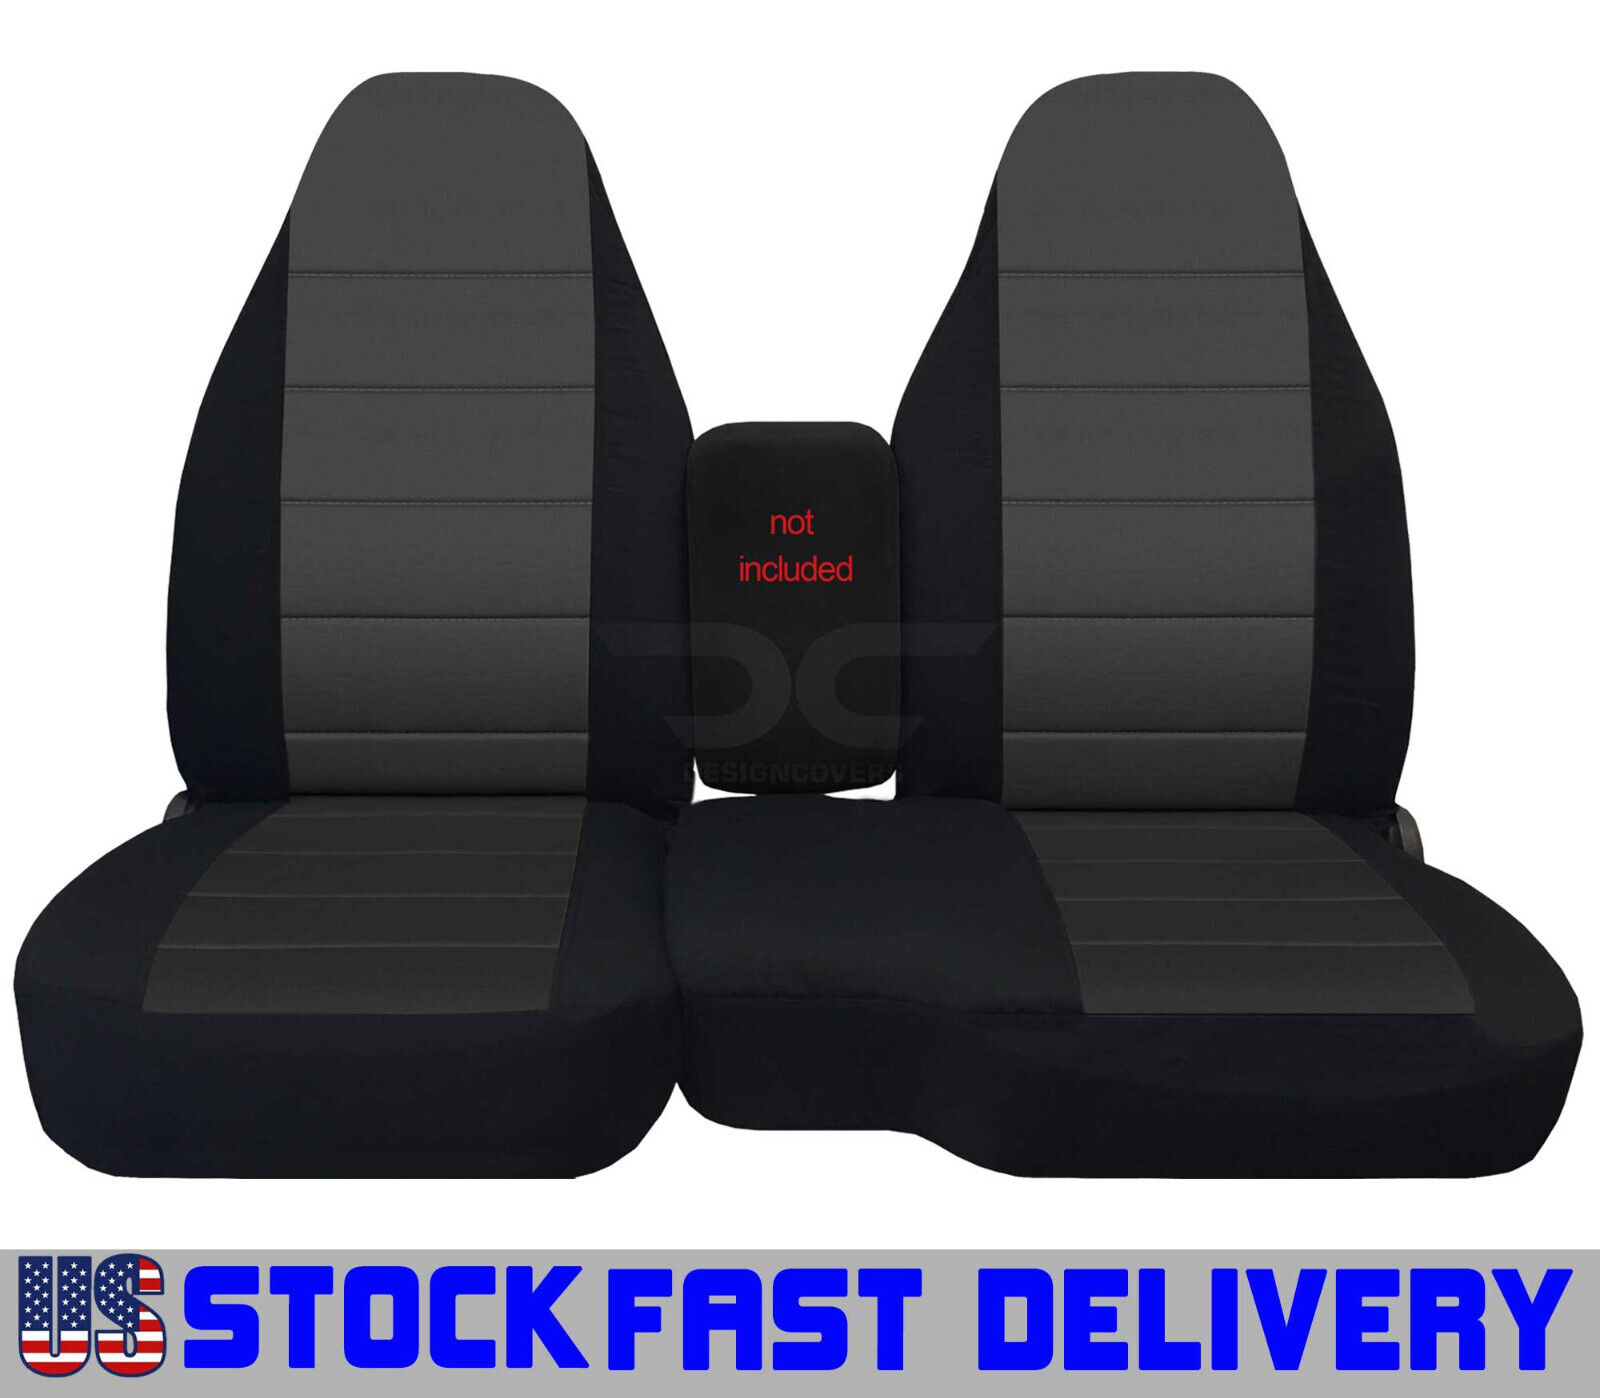 Truck seat covers cotton blk-charcoal center fits 98-03Ford Ranger 60/40 hiback 